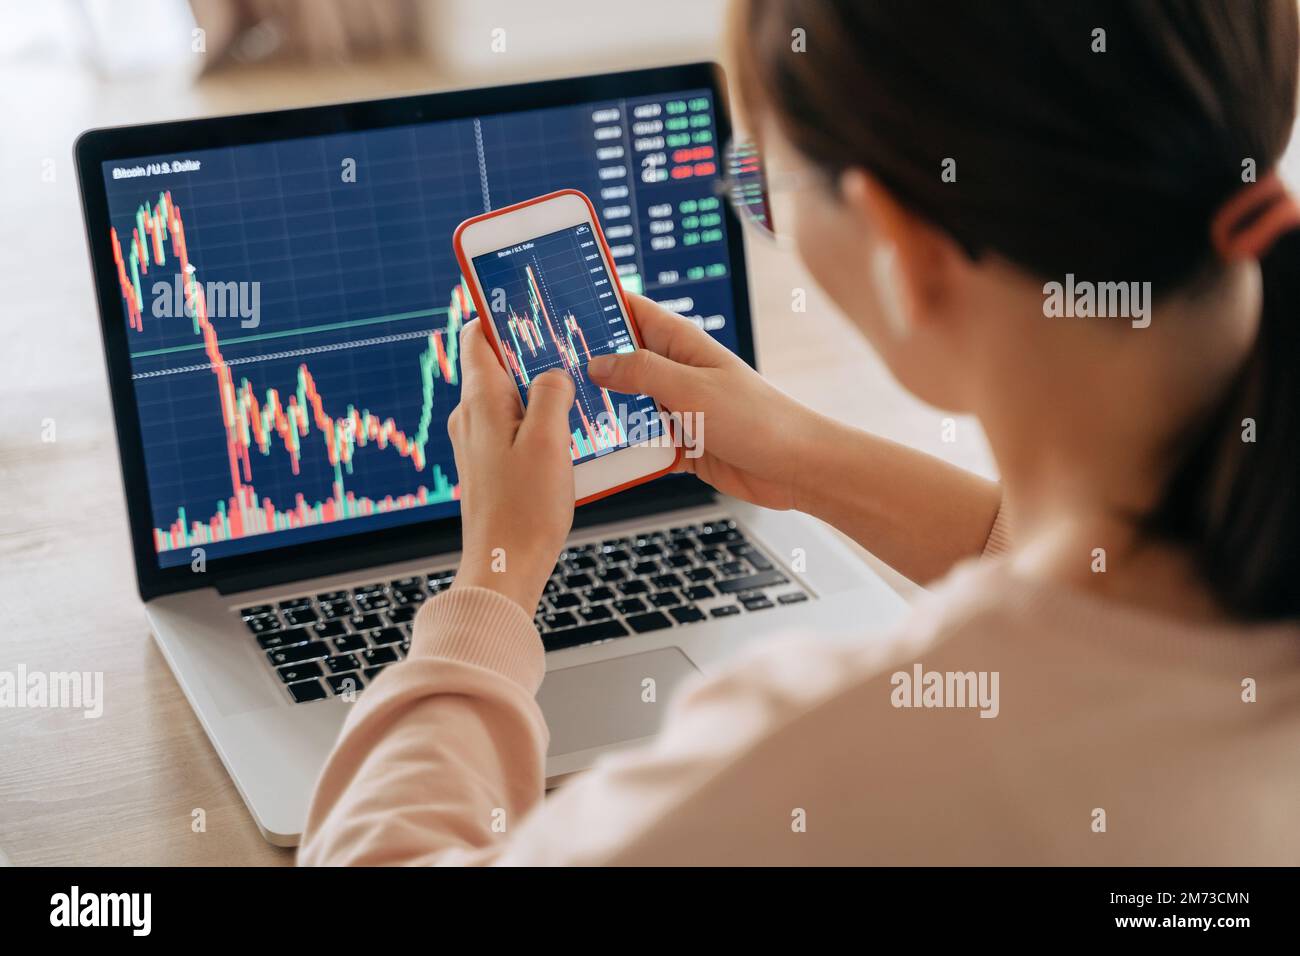 Woman crypto trader investor broker using smartphone app and laptop executing financial stock trade market trading order to buy or sell cryptocurrency. Selective focus on hands and cellphone screen Stock Photo